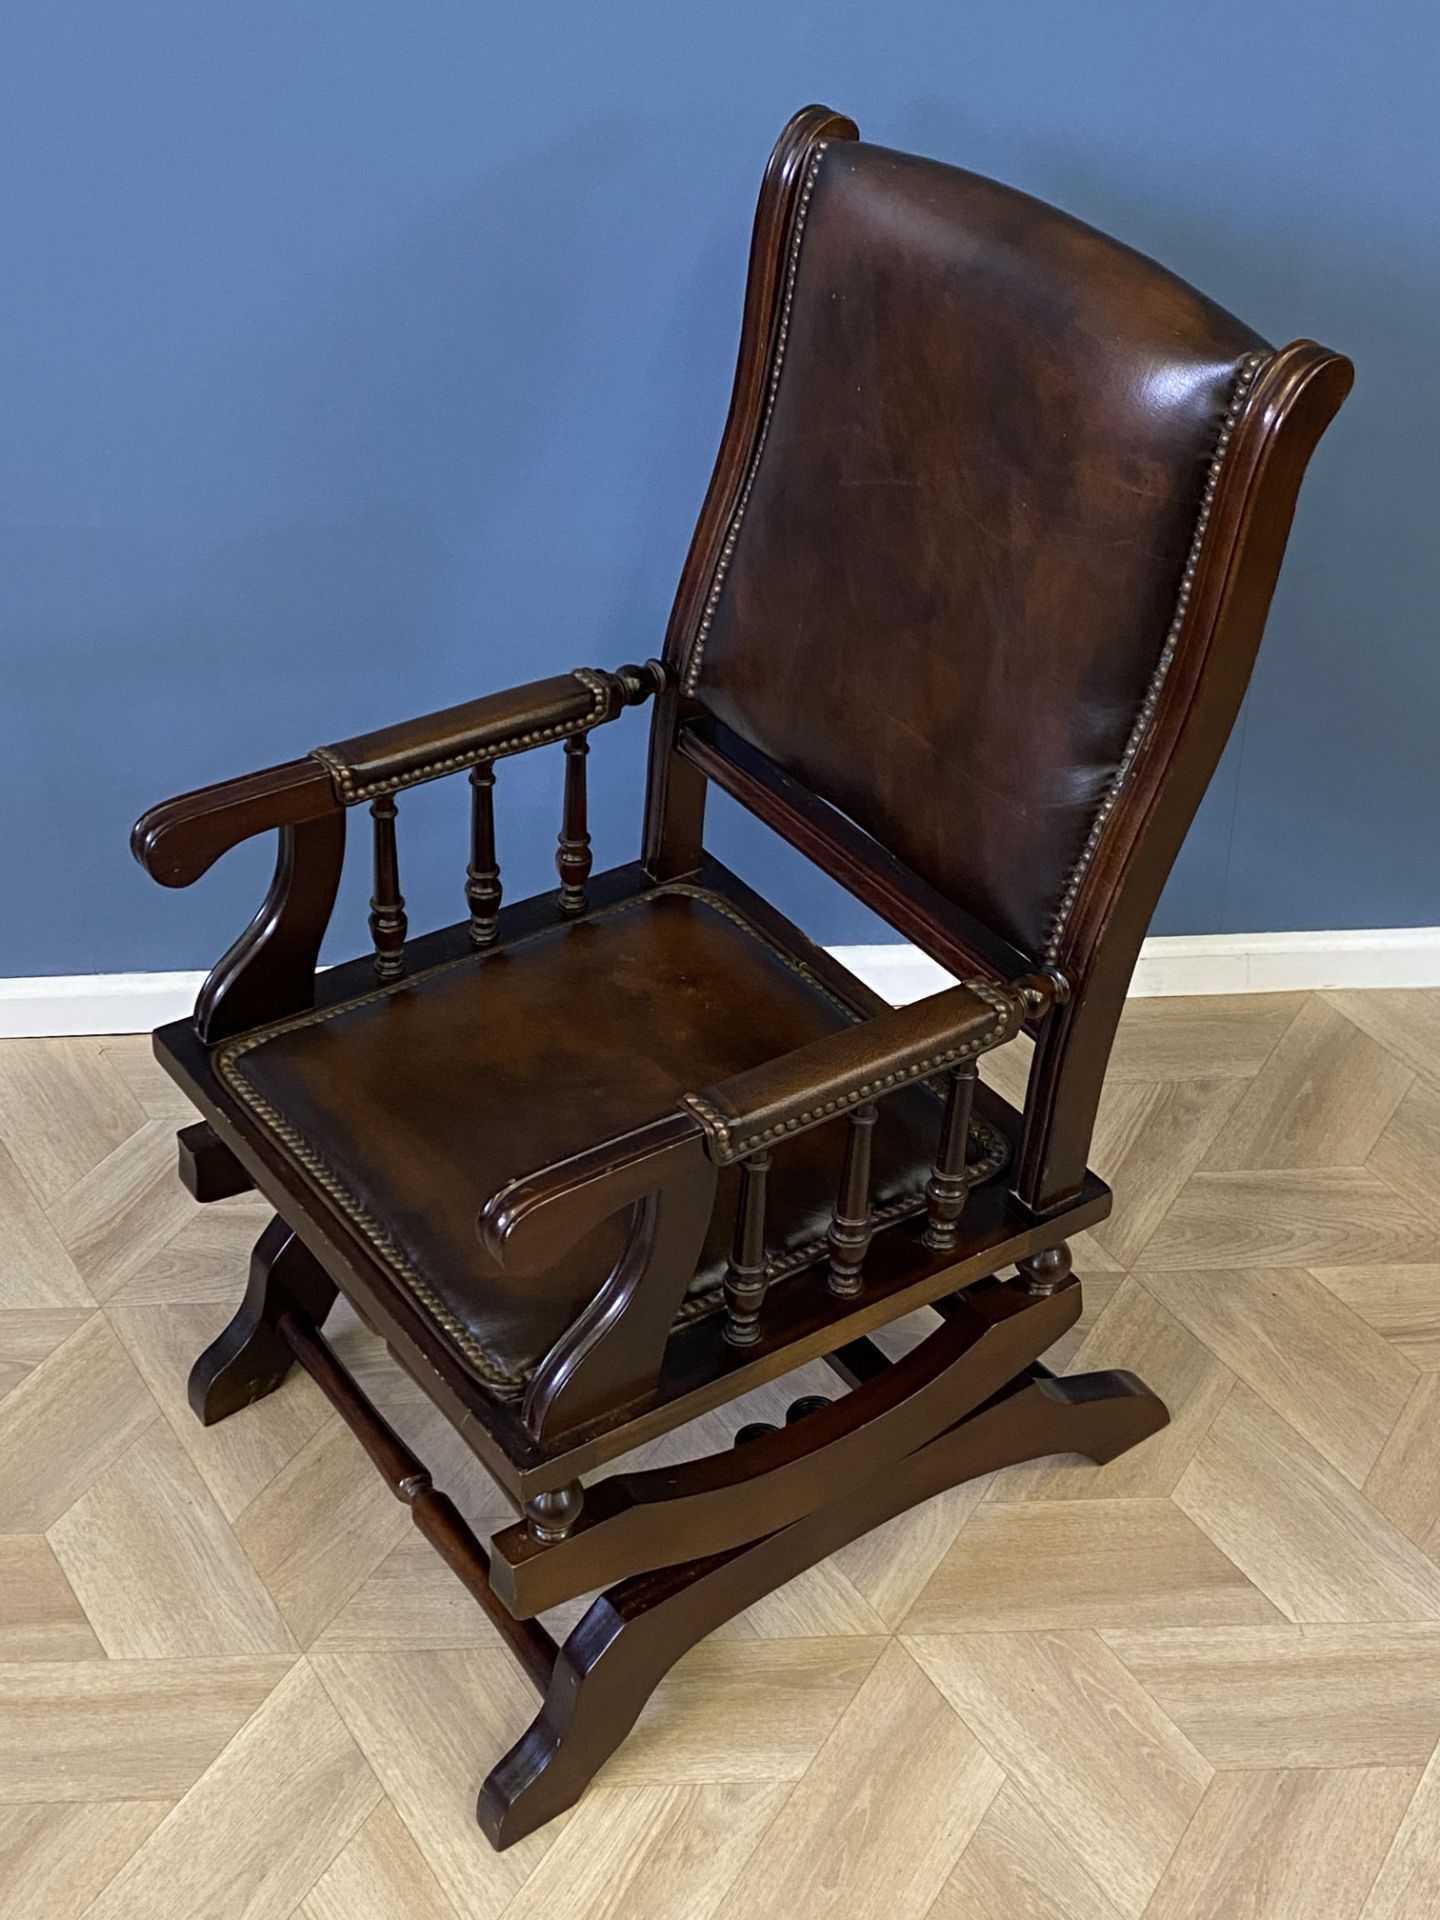 Mahogany framed leather rocking chair - Image 6 of 8